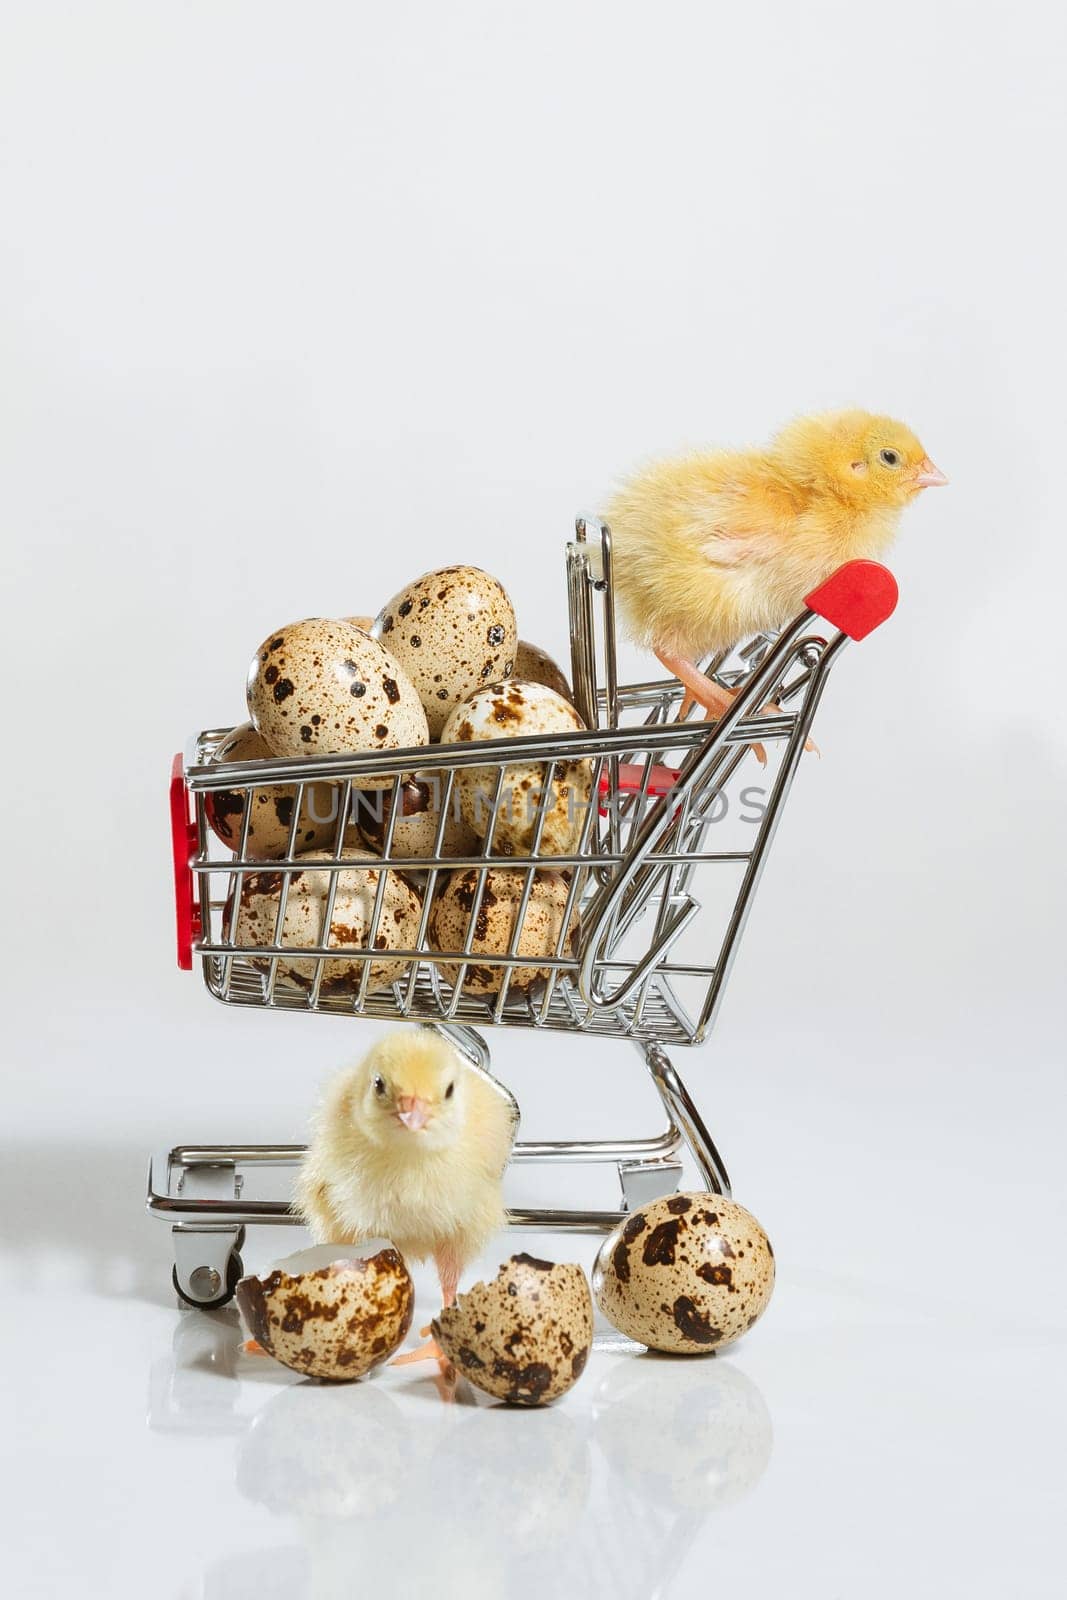 Quail chickens with a basket of quail eggs. The concept of a grocery basket and grocery sales in the store by ElenaNEL